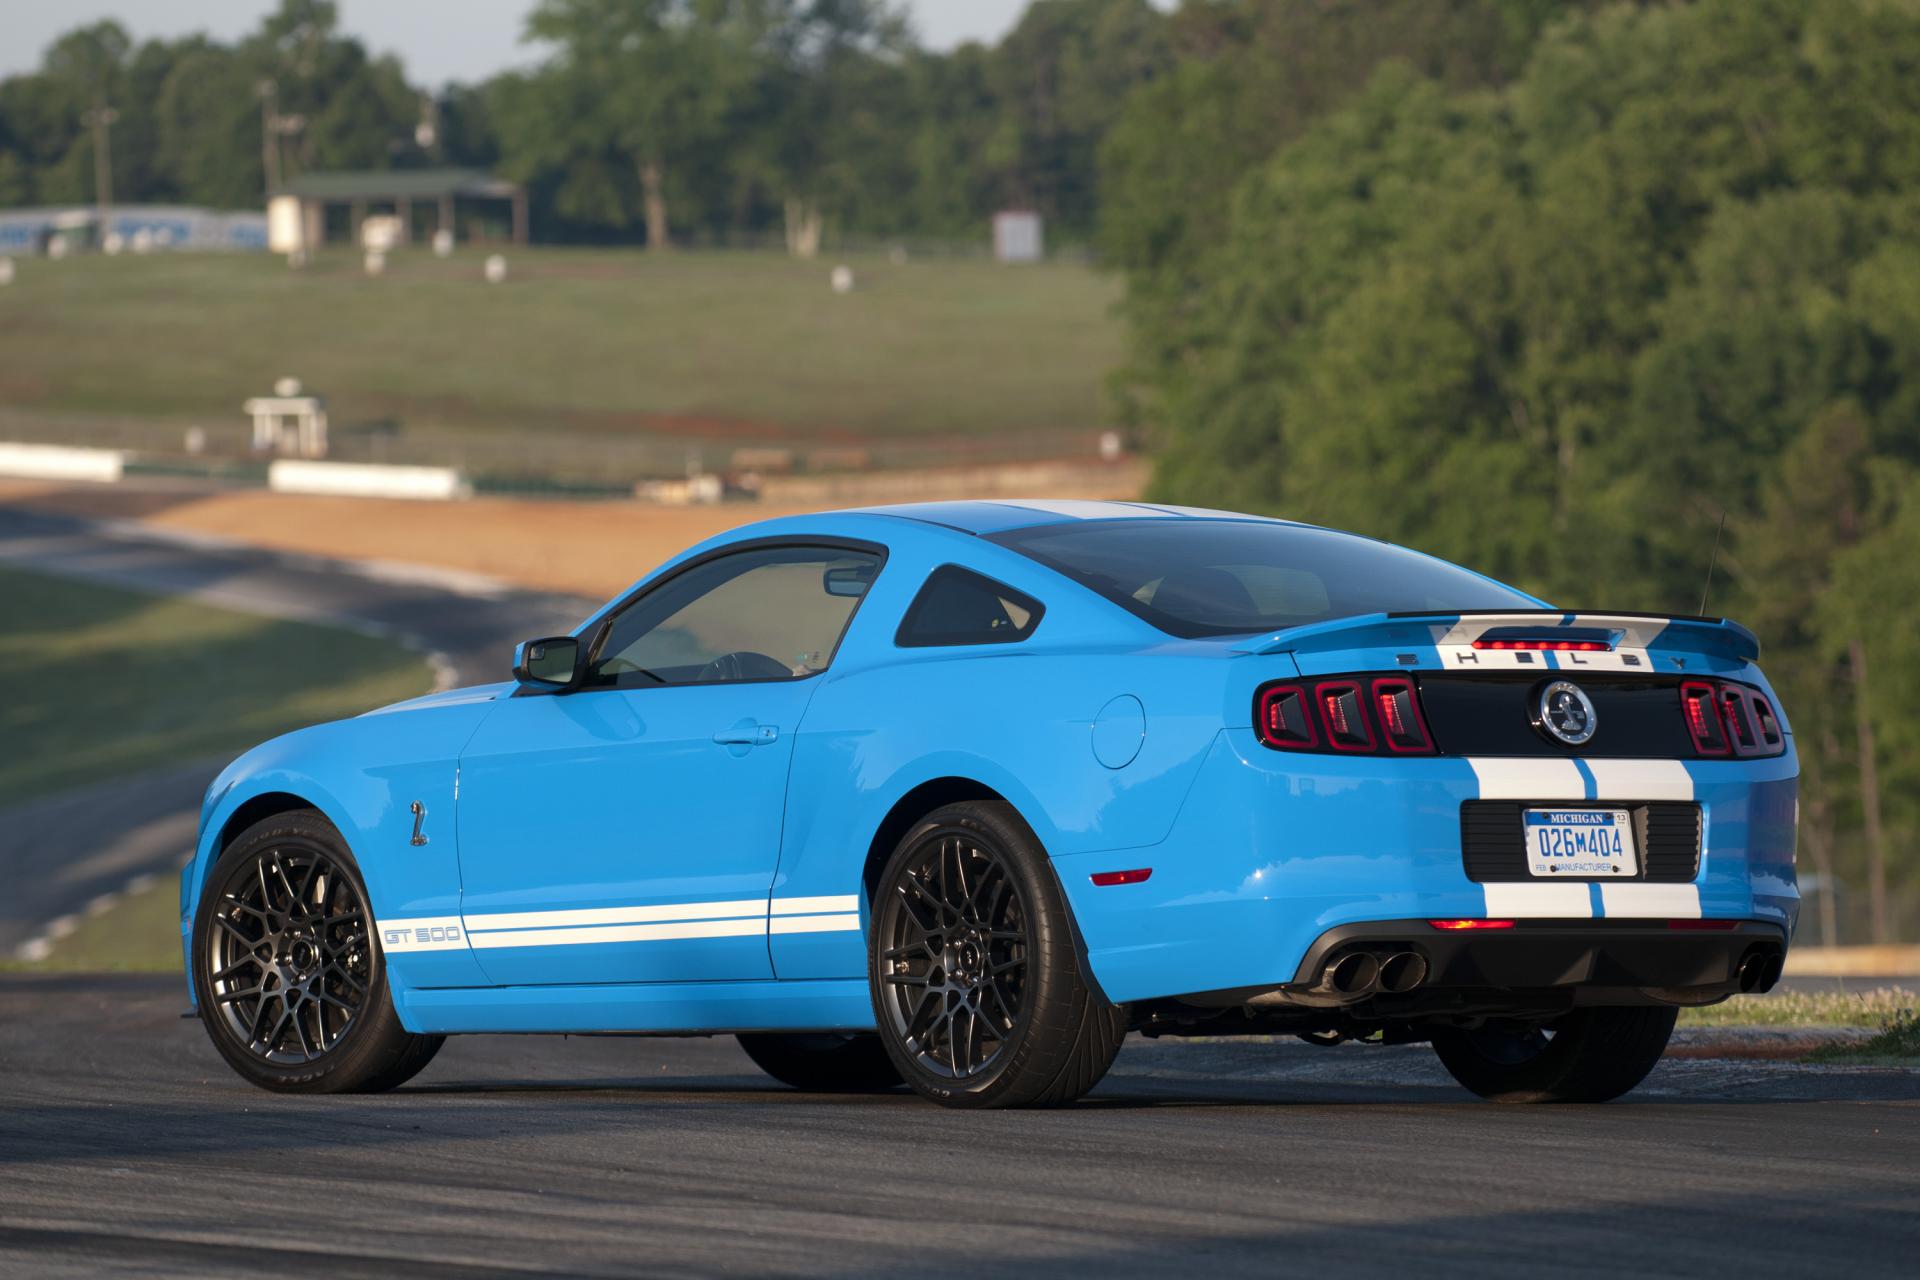 2013 Shelby Mustang Gt500 Image Photo 39 Of 83